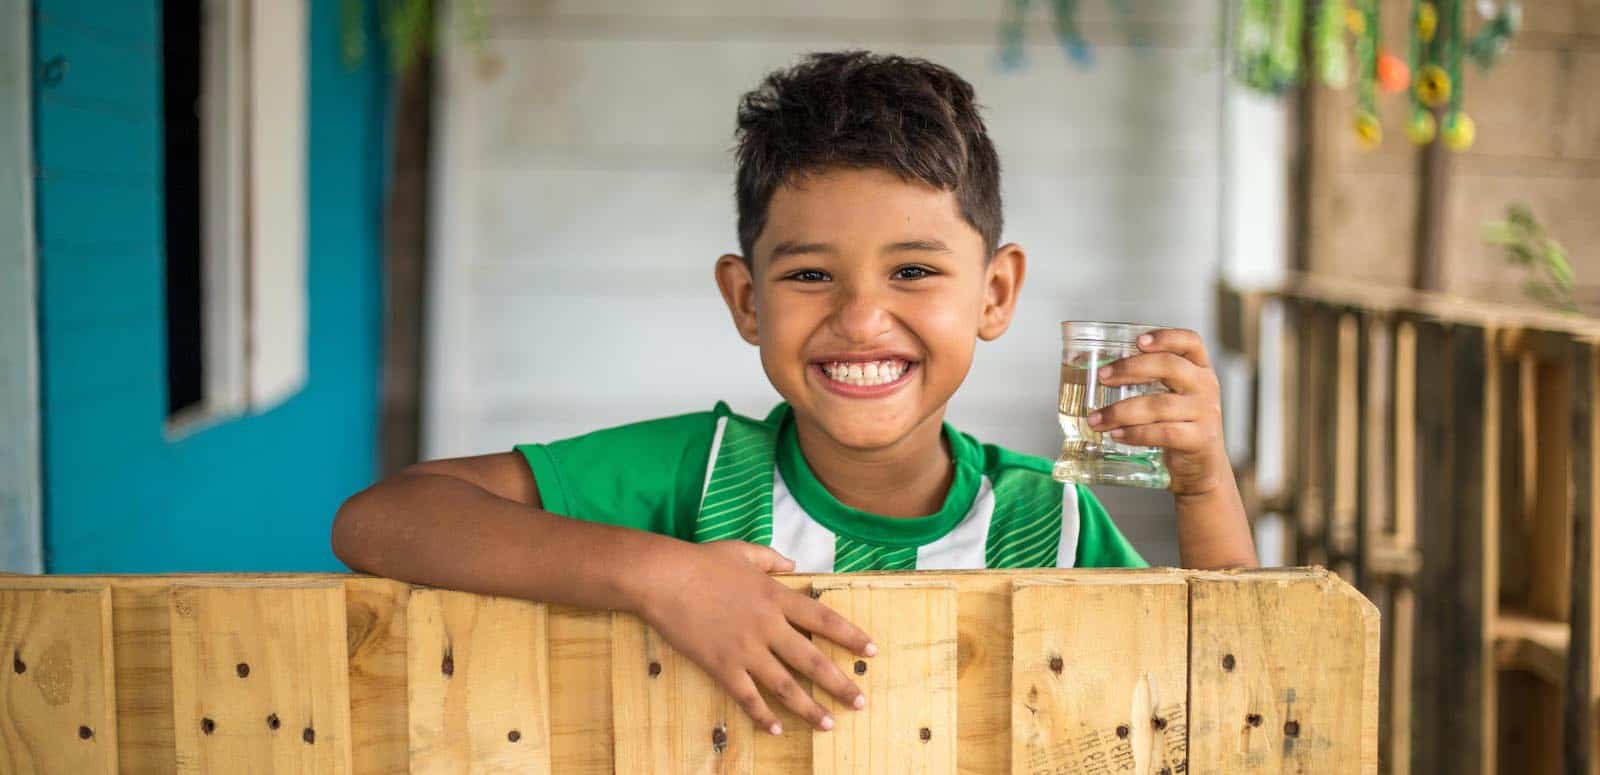 Kids Around the World: A boy stands at a fence holding a glass of water.